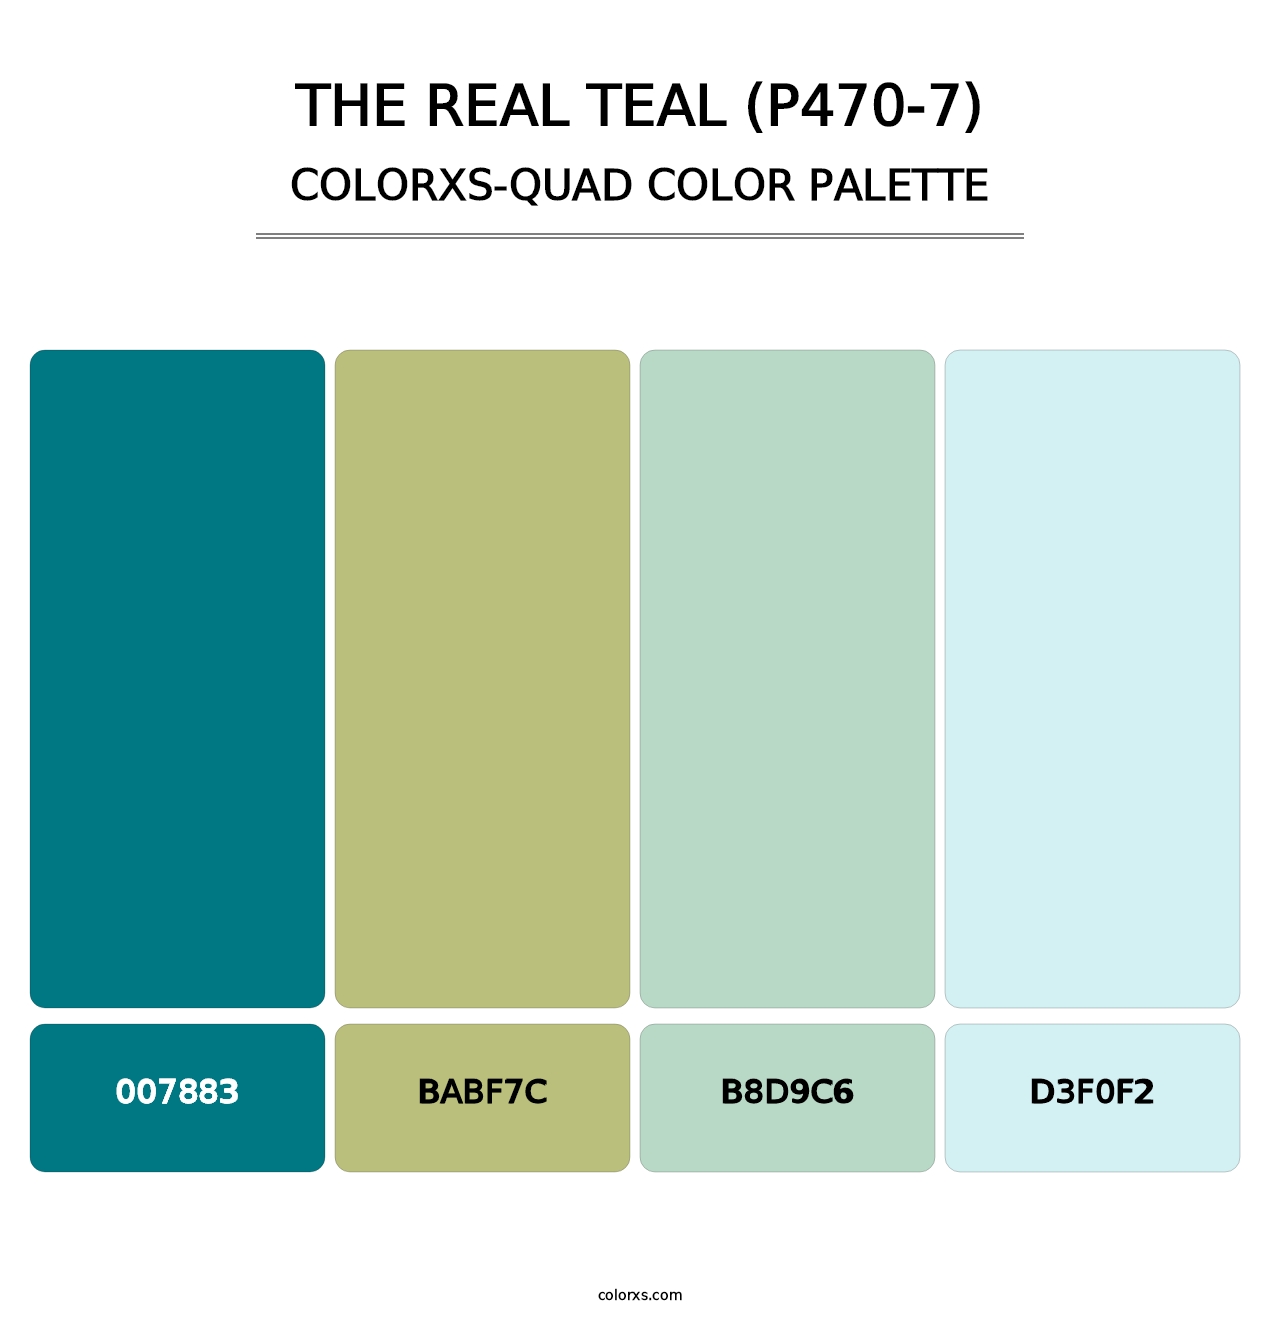 The Real Teal (P470-7) - Colorxs Quad Palette